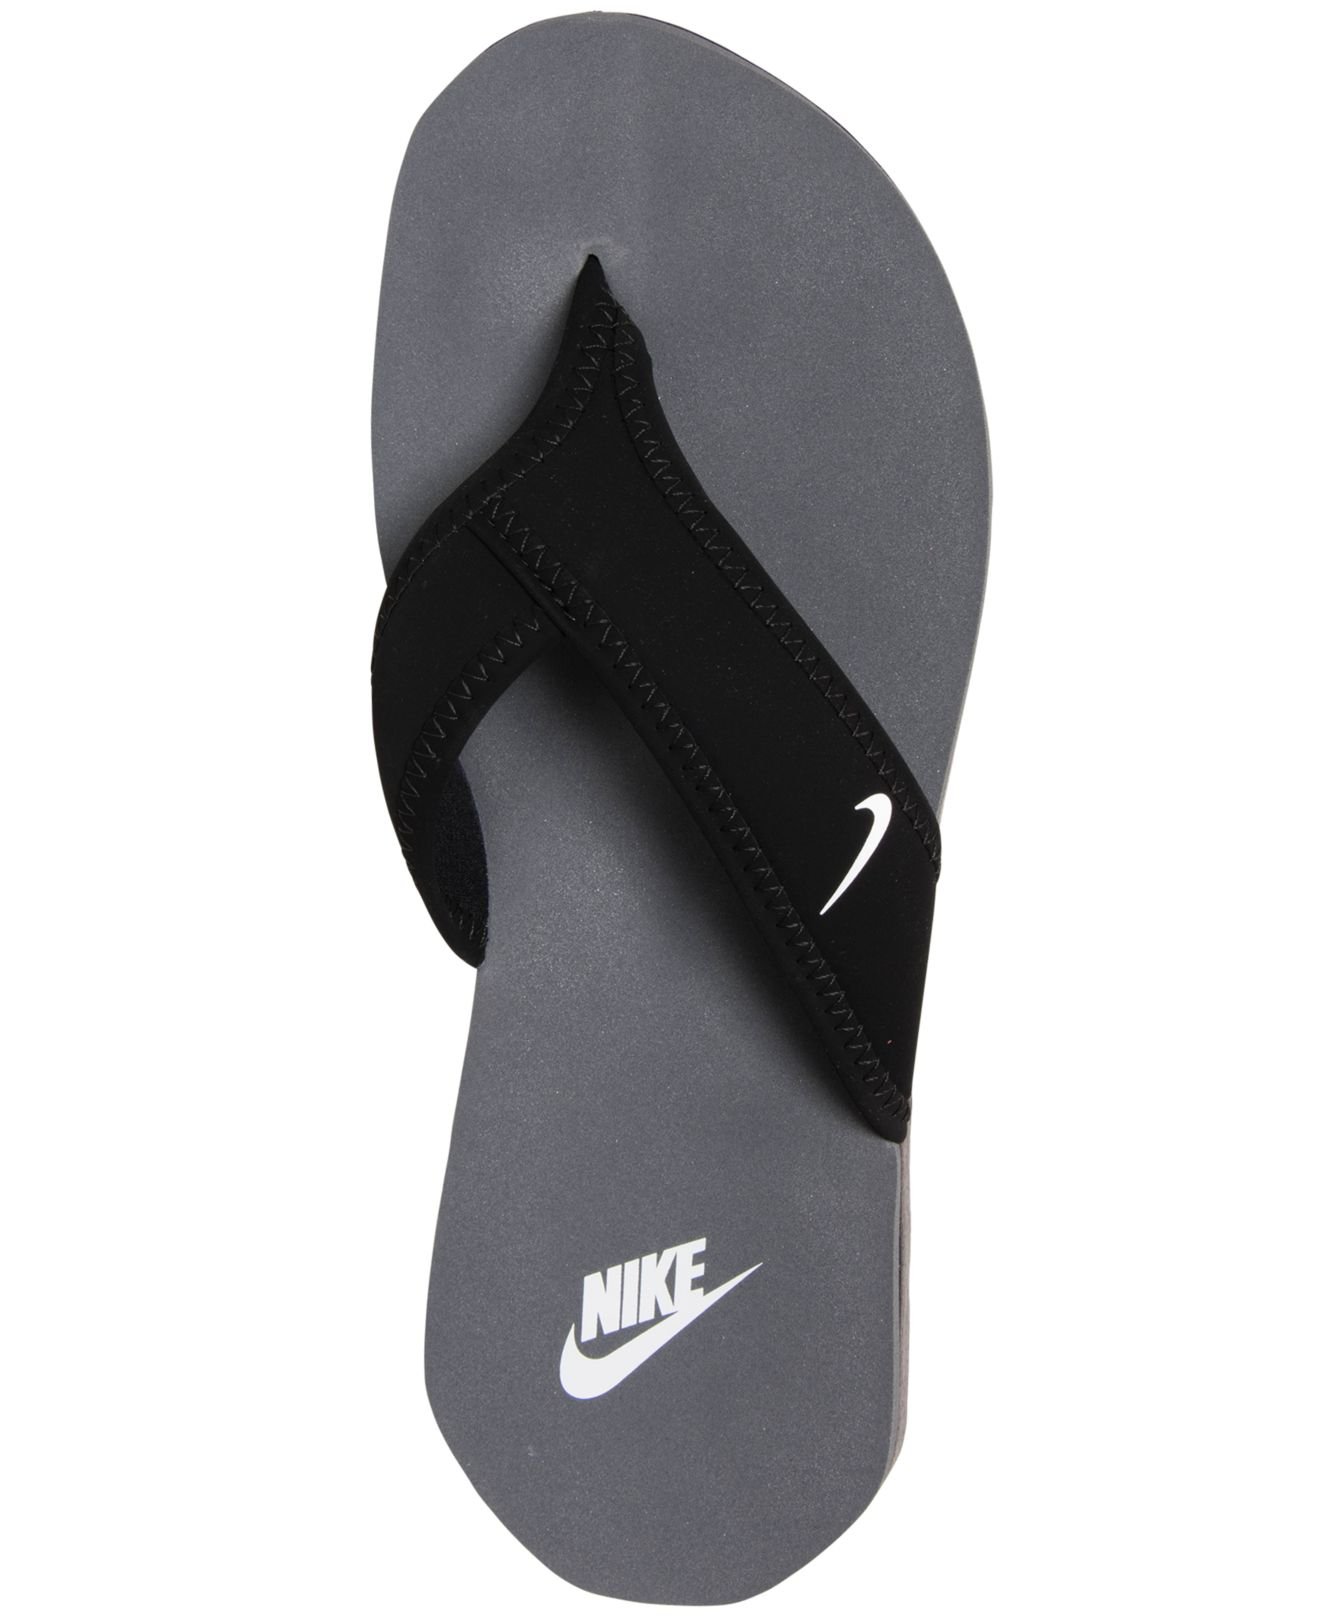 Nike Men chroma thong slippers at Rs 600/pair in Ranchi | ID: 15608730630